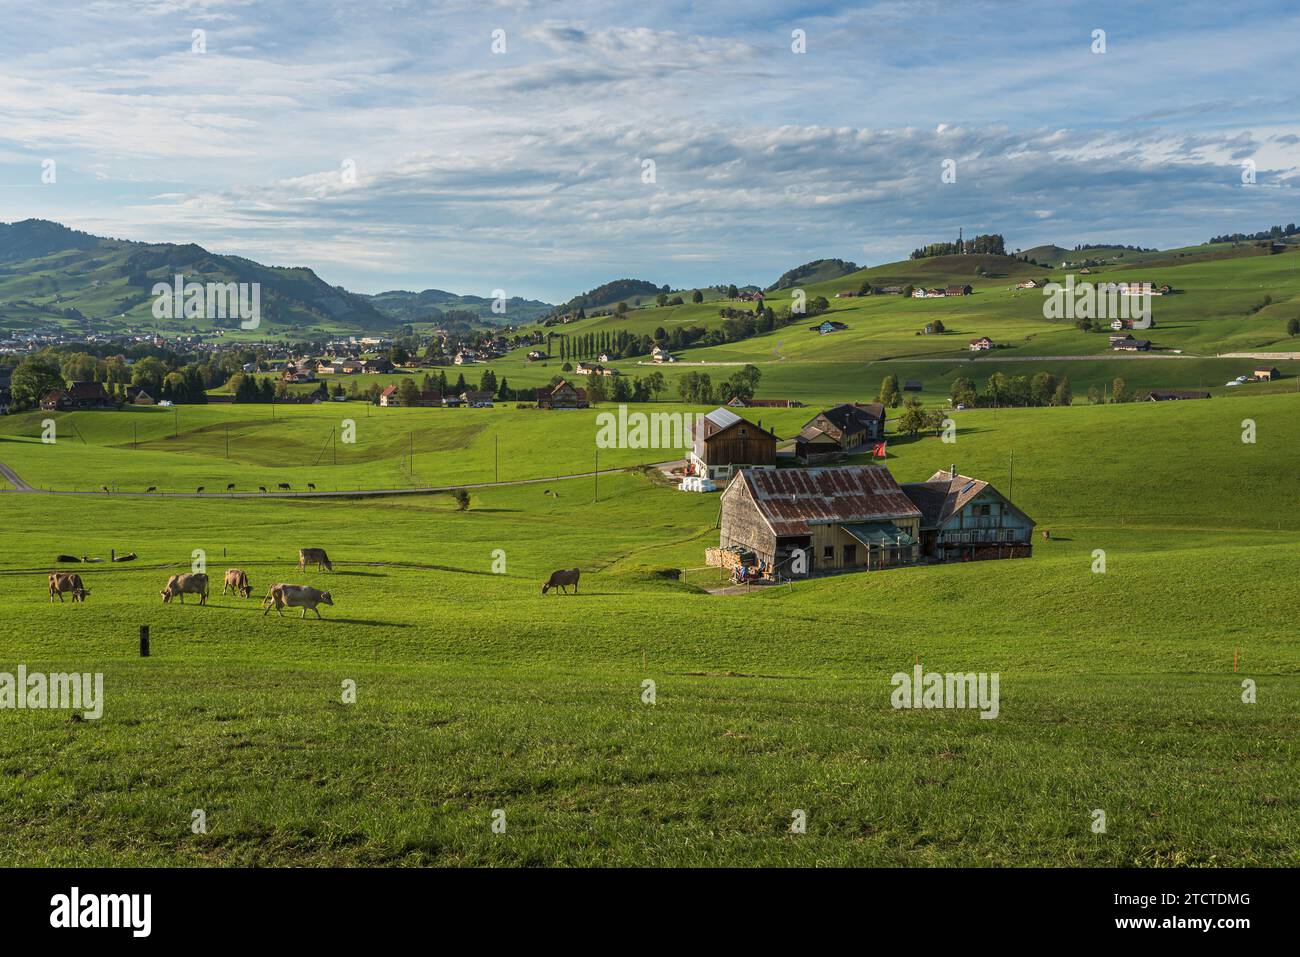 Appenzell region with scattered farm houses and grazing cows on meadows, Canton of Appenzell Innerrhoden, Switzerland Stock Photo